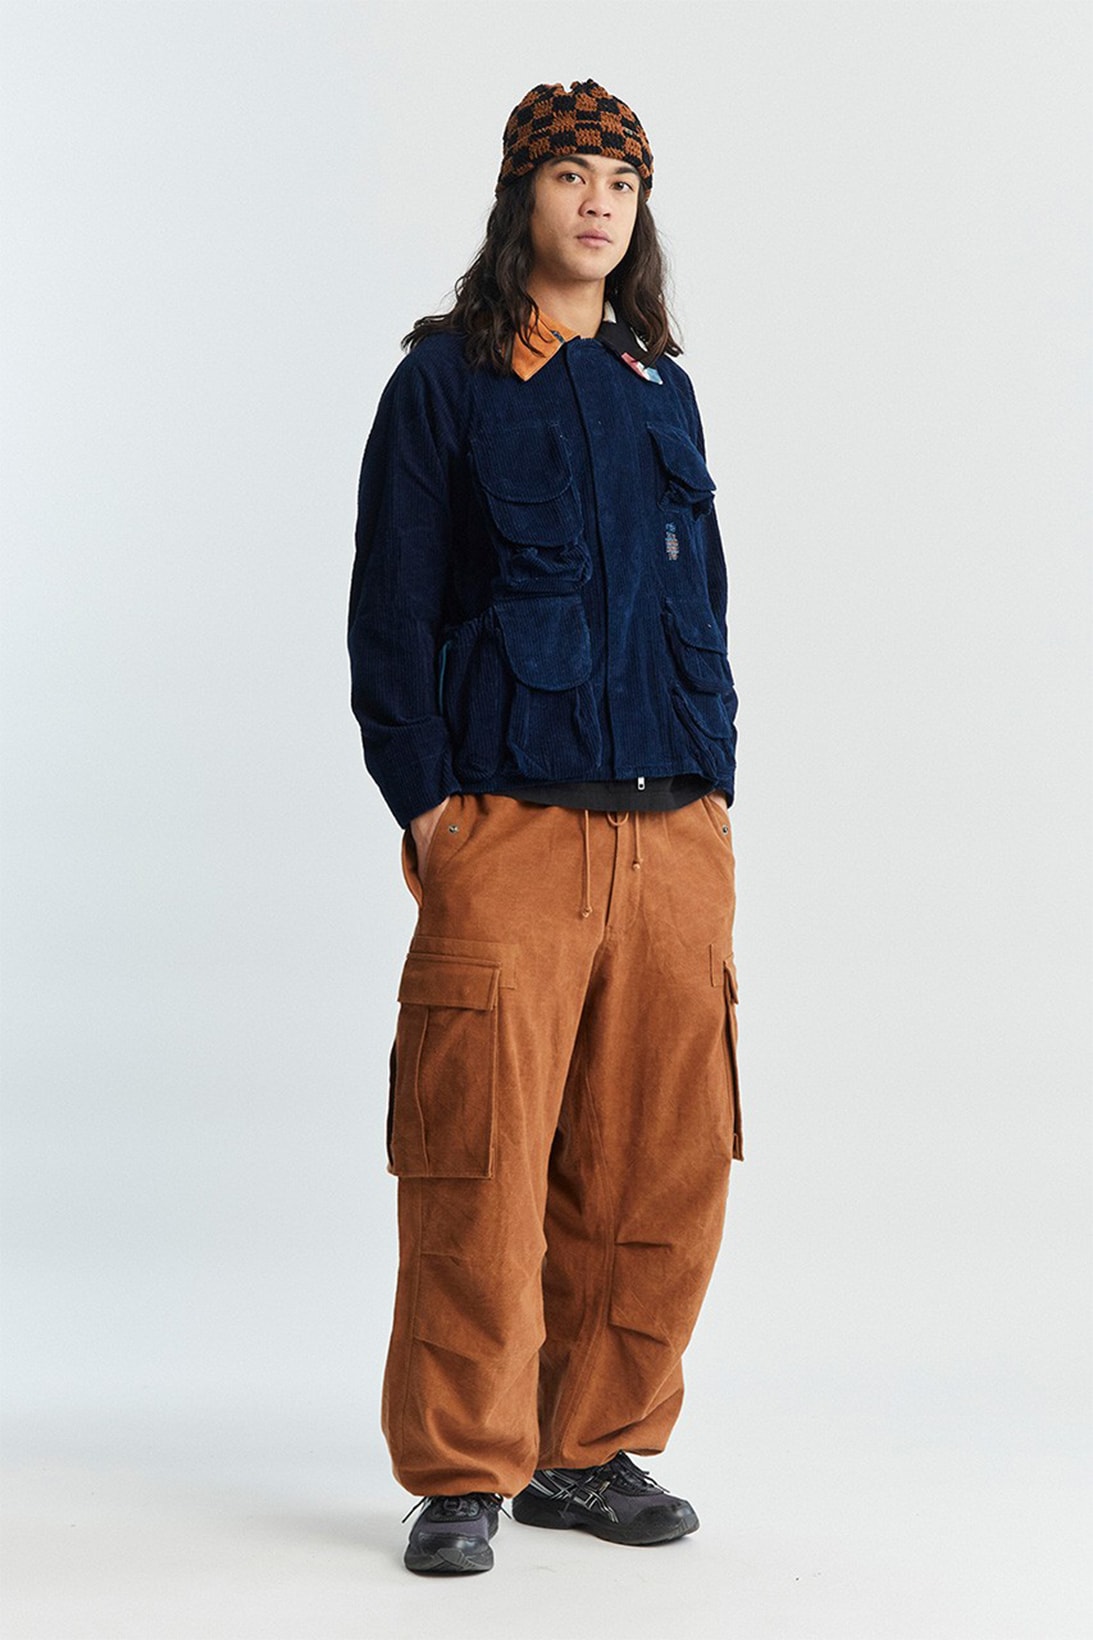 Story Mfg. Try Try Try Fall Winter Collection Lookbook Jacket Pants Blue Brown